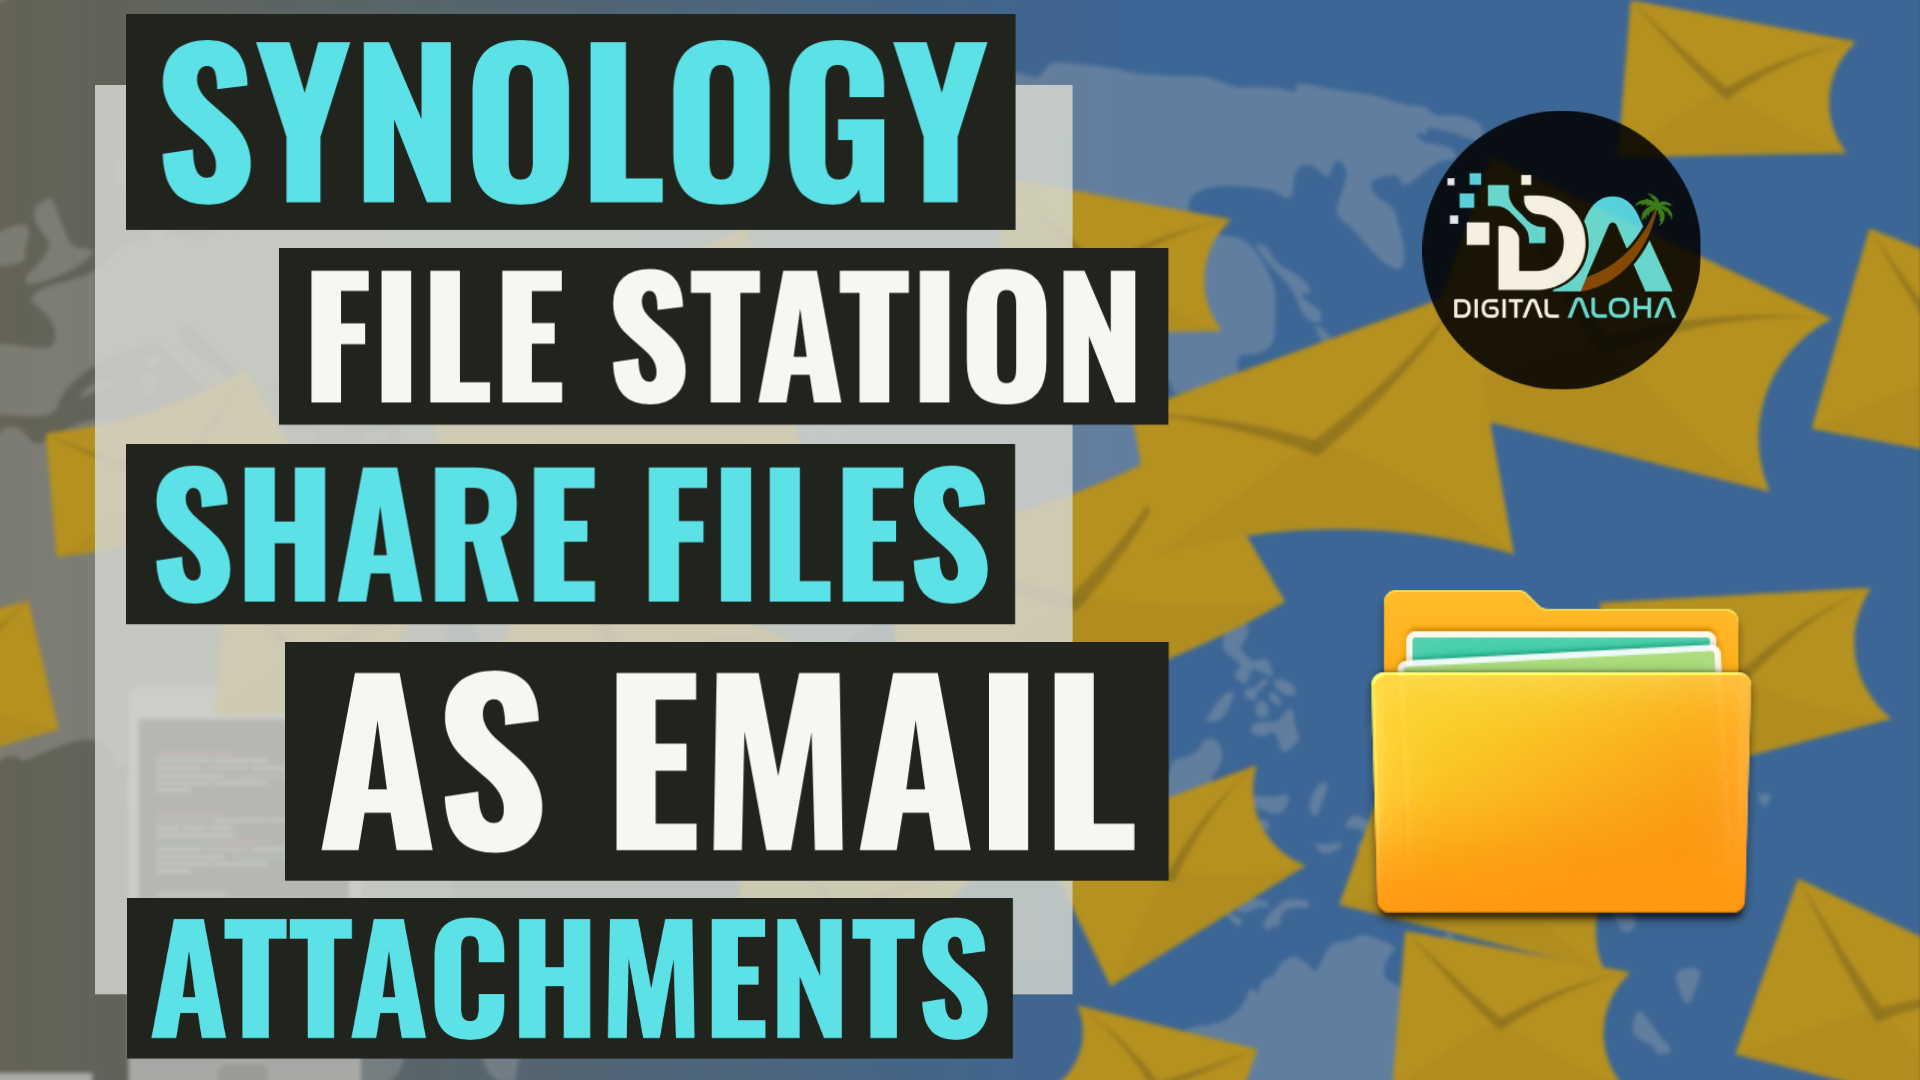 Send Files As Email Attachments Using Synology File Station